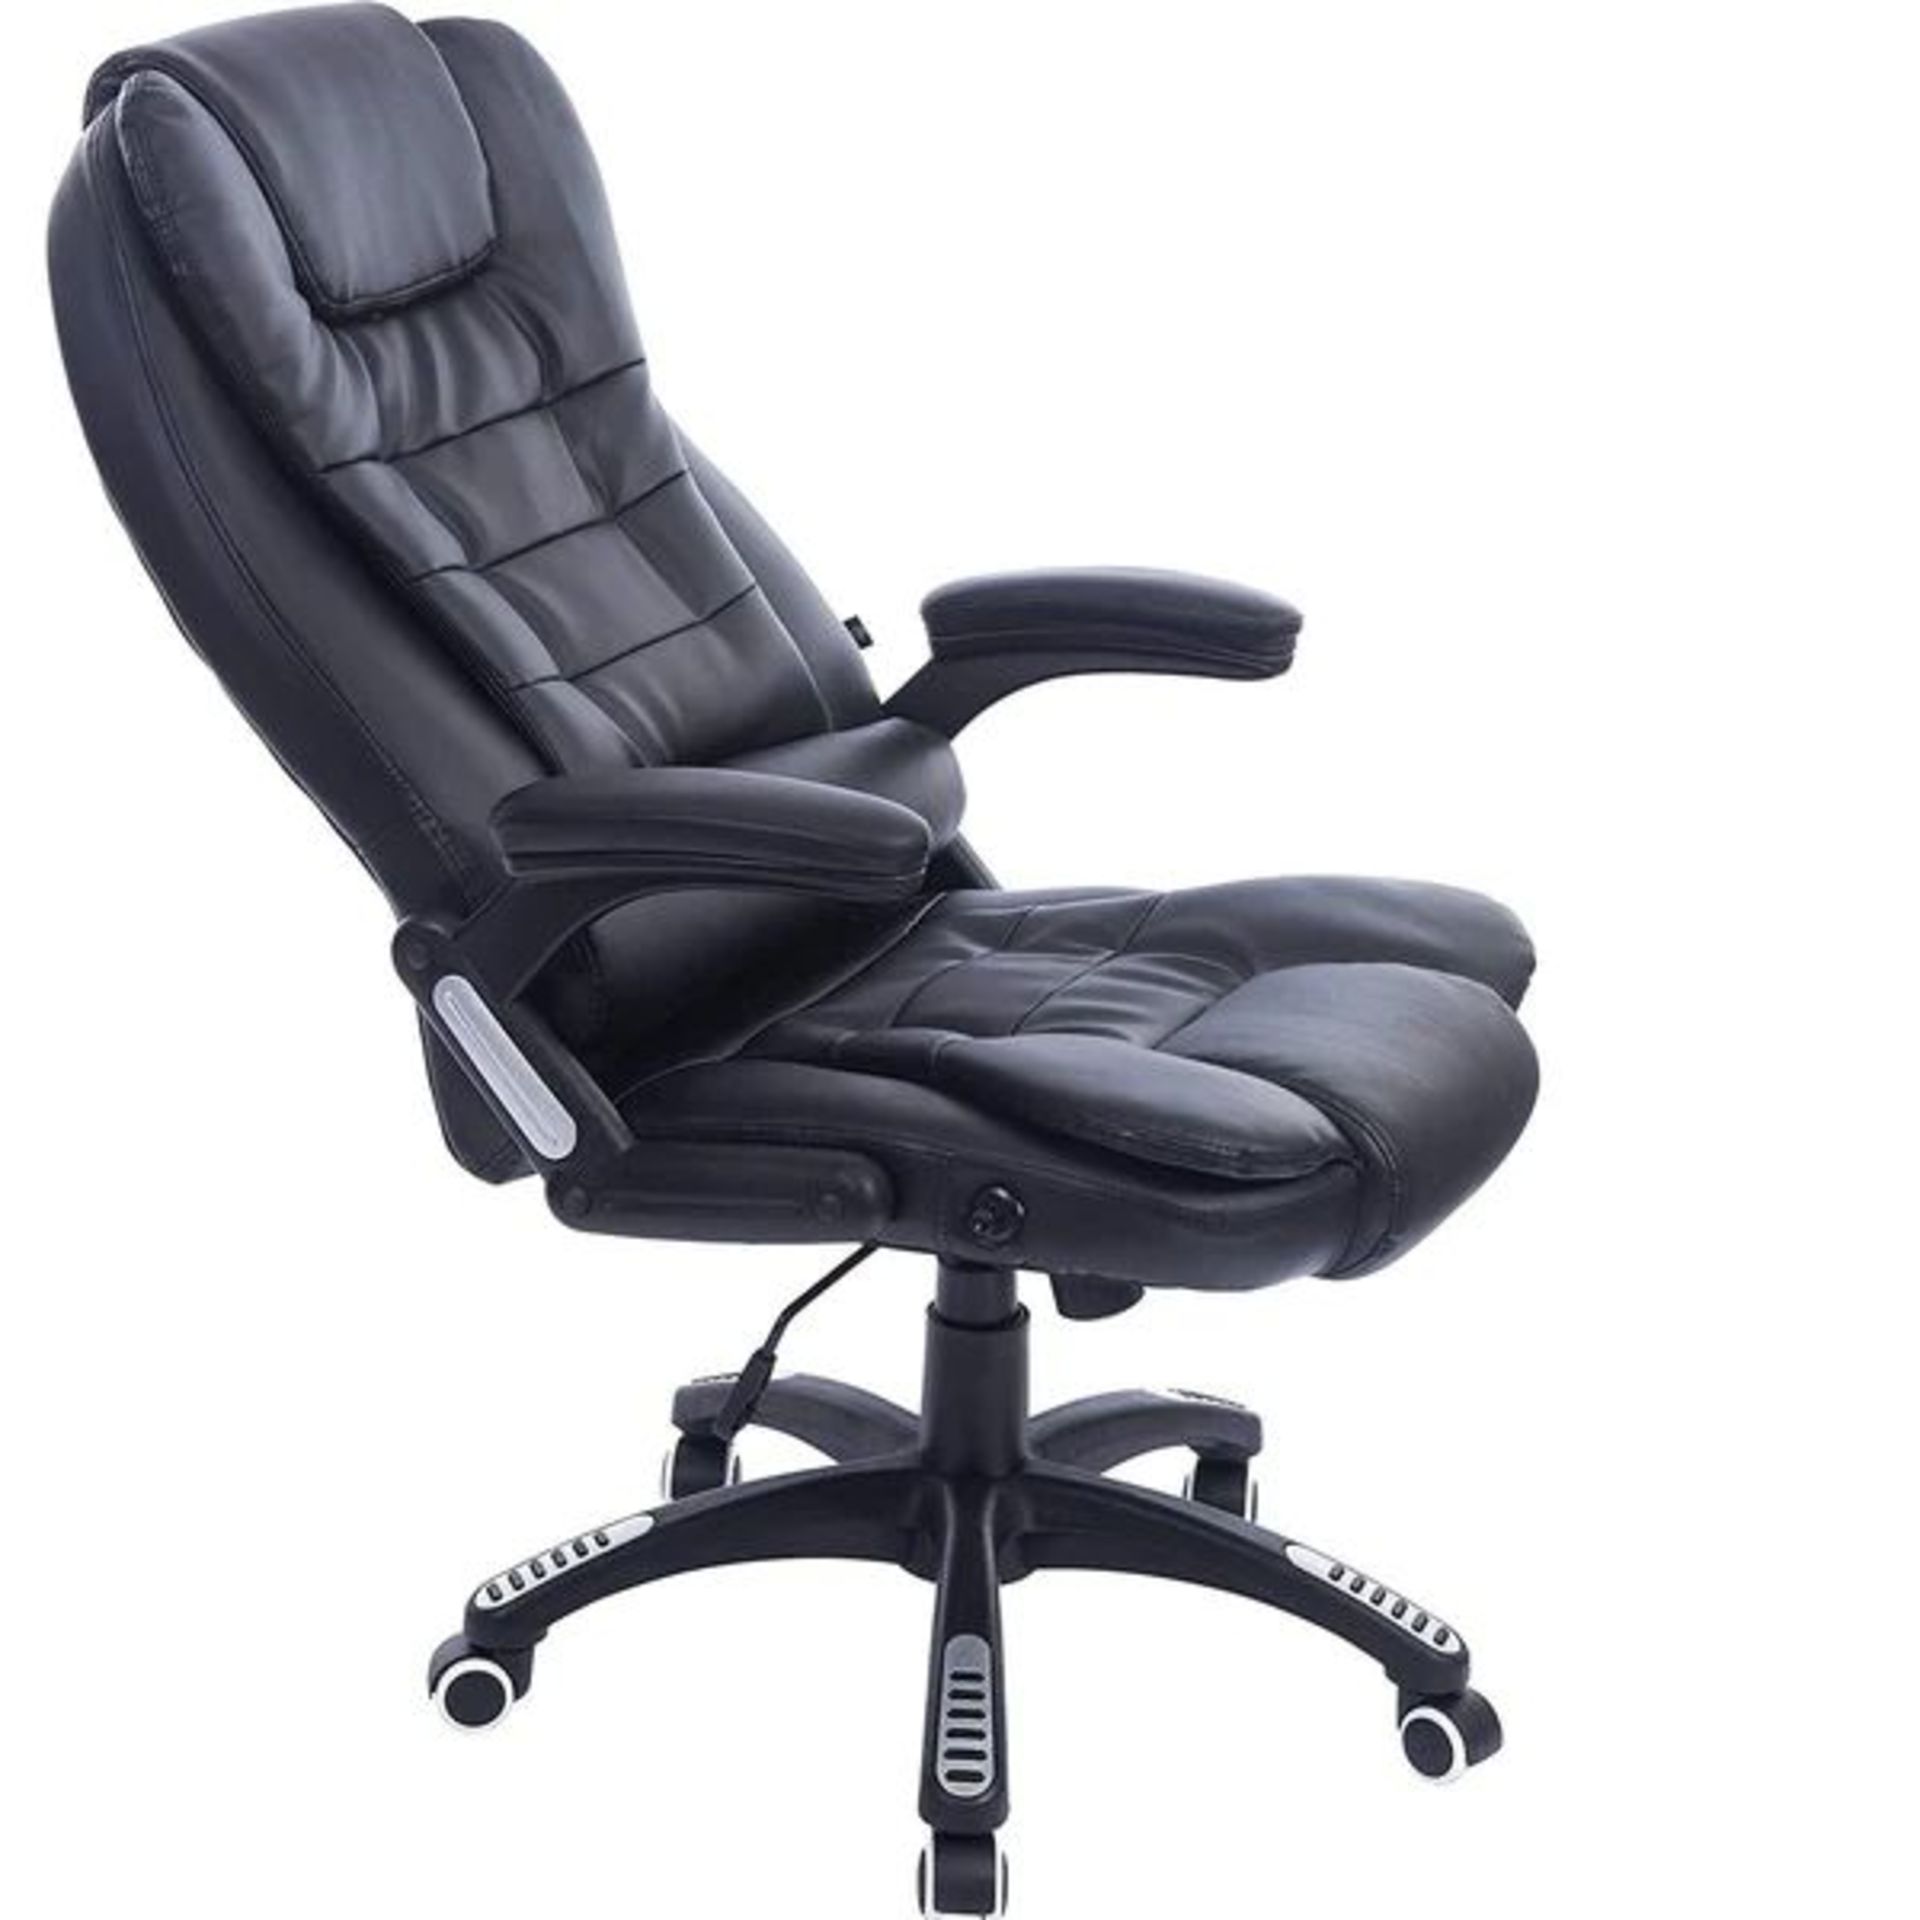 Executive Recline Padded Swivel Office Chair with Vibrating Massage Function, MM17 Black. - SR24. - Image 2 of 2